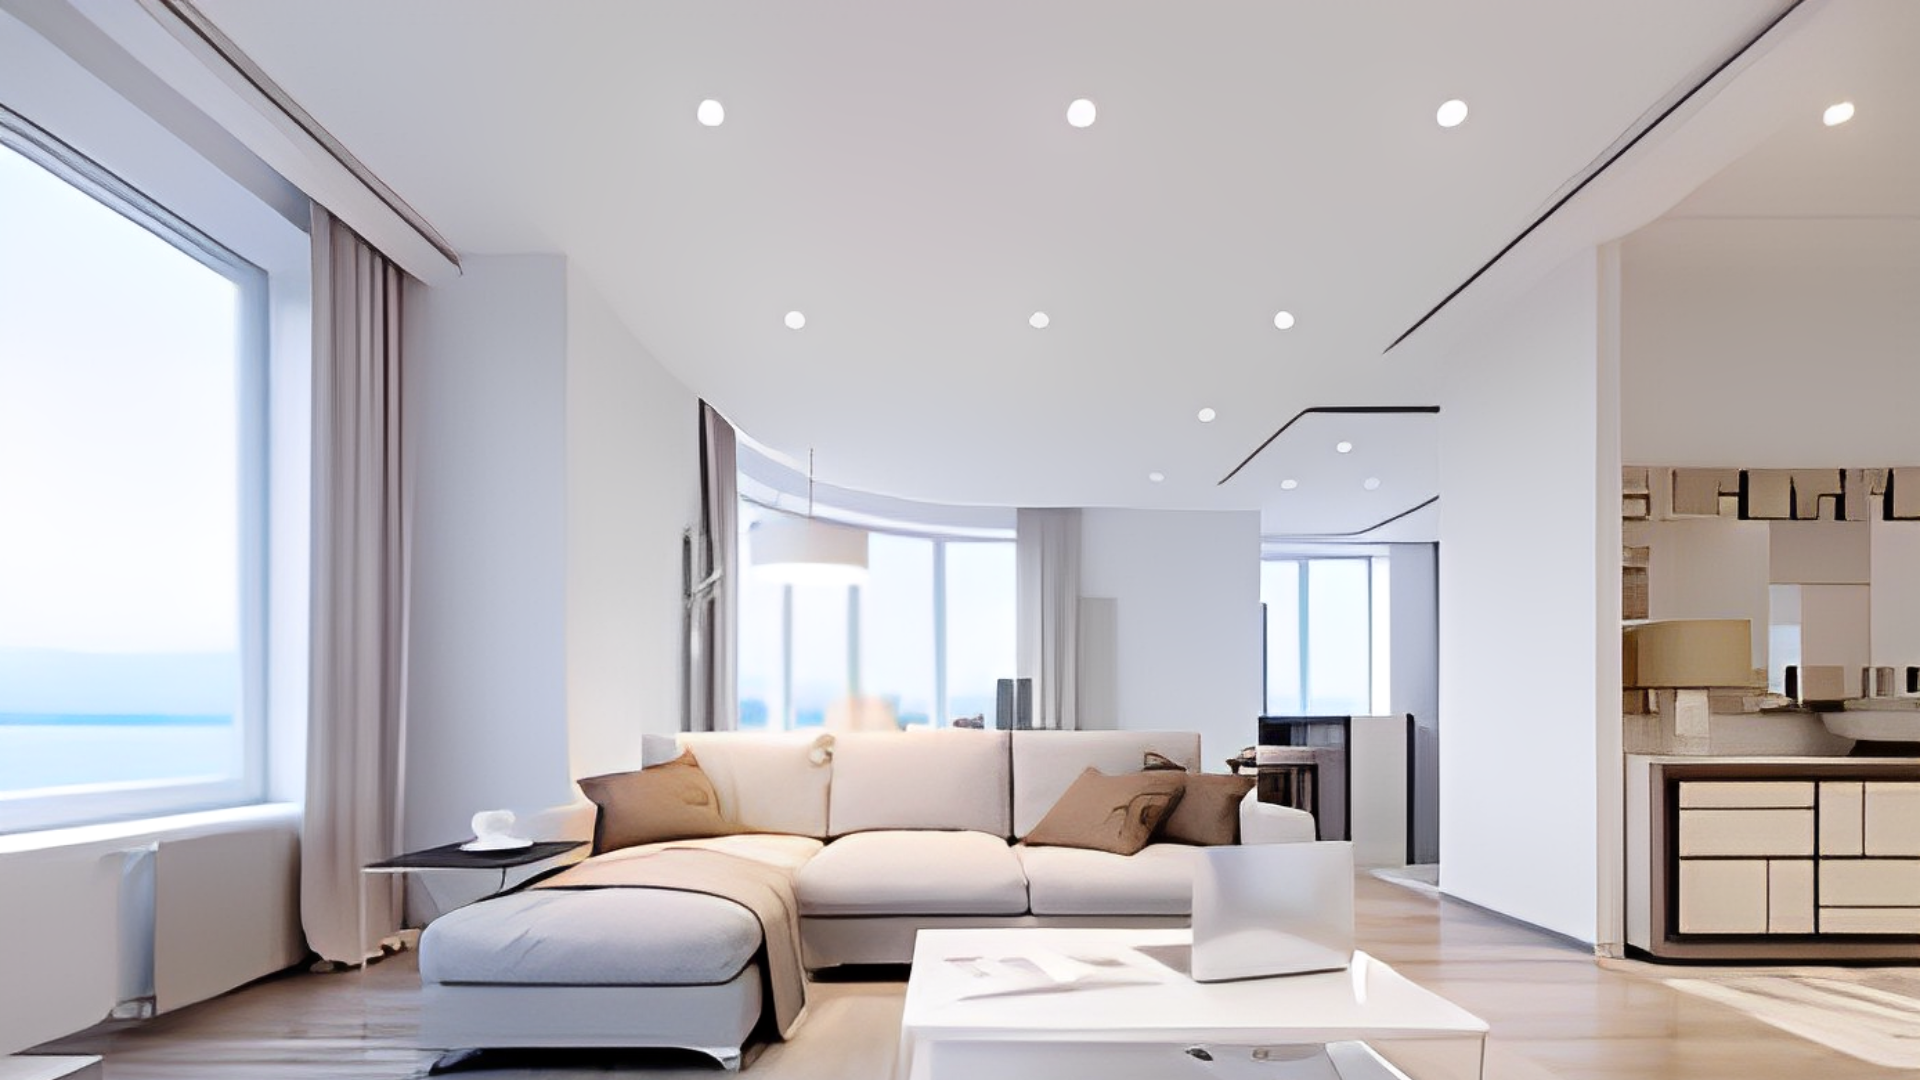 Illuminate Your Space: Explore Modern Lighting Options for Your Living Room